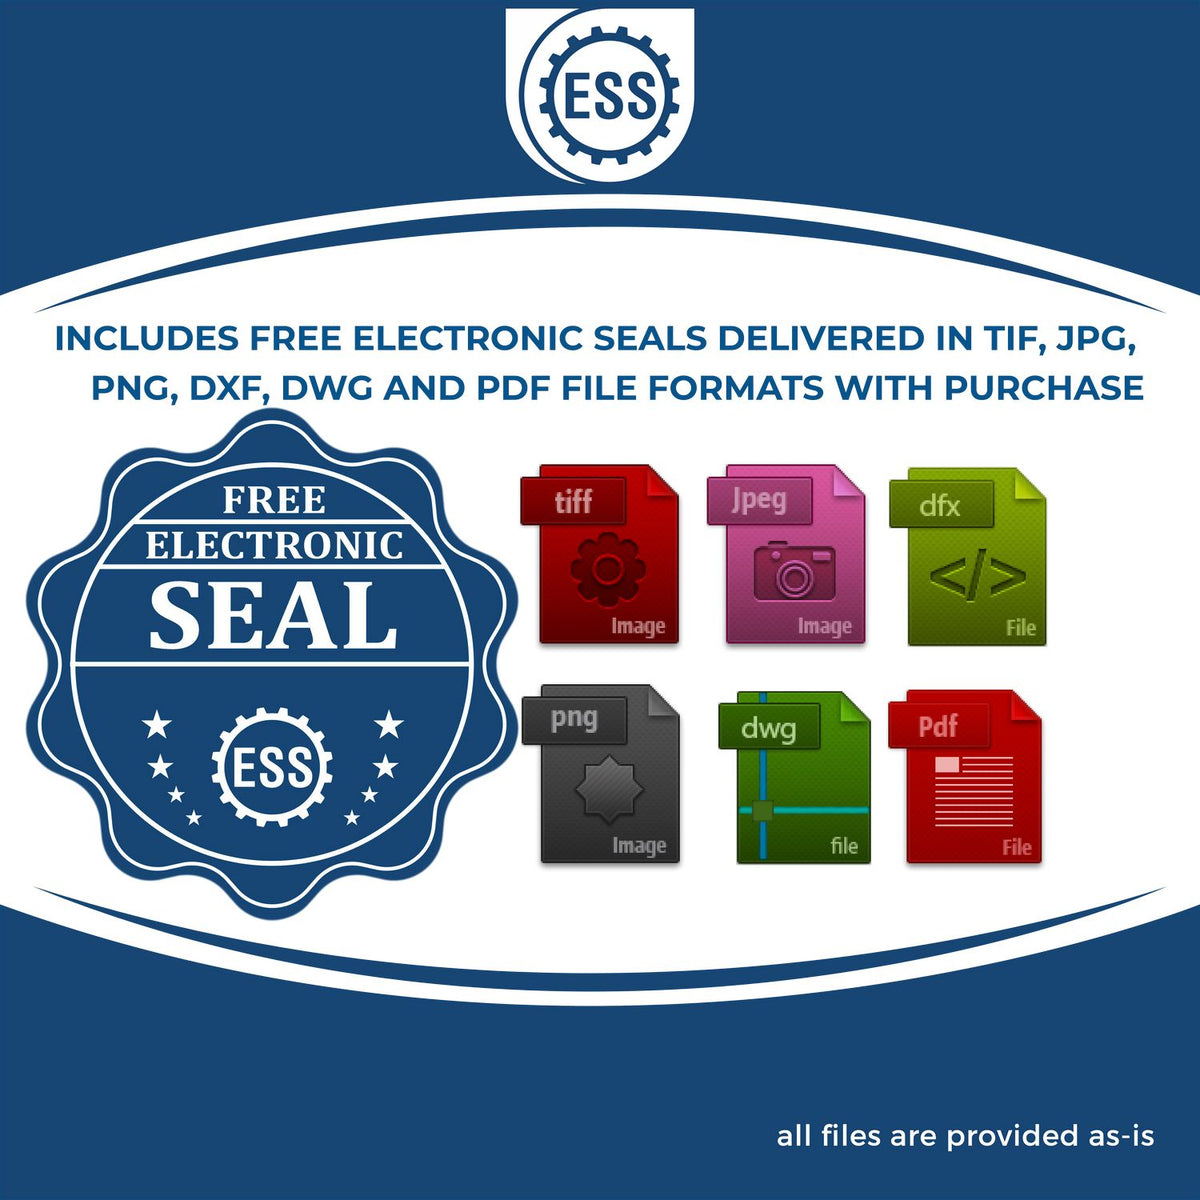 An infographic for the free electronic seal for the State of Florida Long Reach Architectural Embossing Seal illustrating the different file type icons such as DXF, DWG, TIF, JPG and PNG.